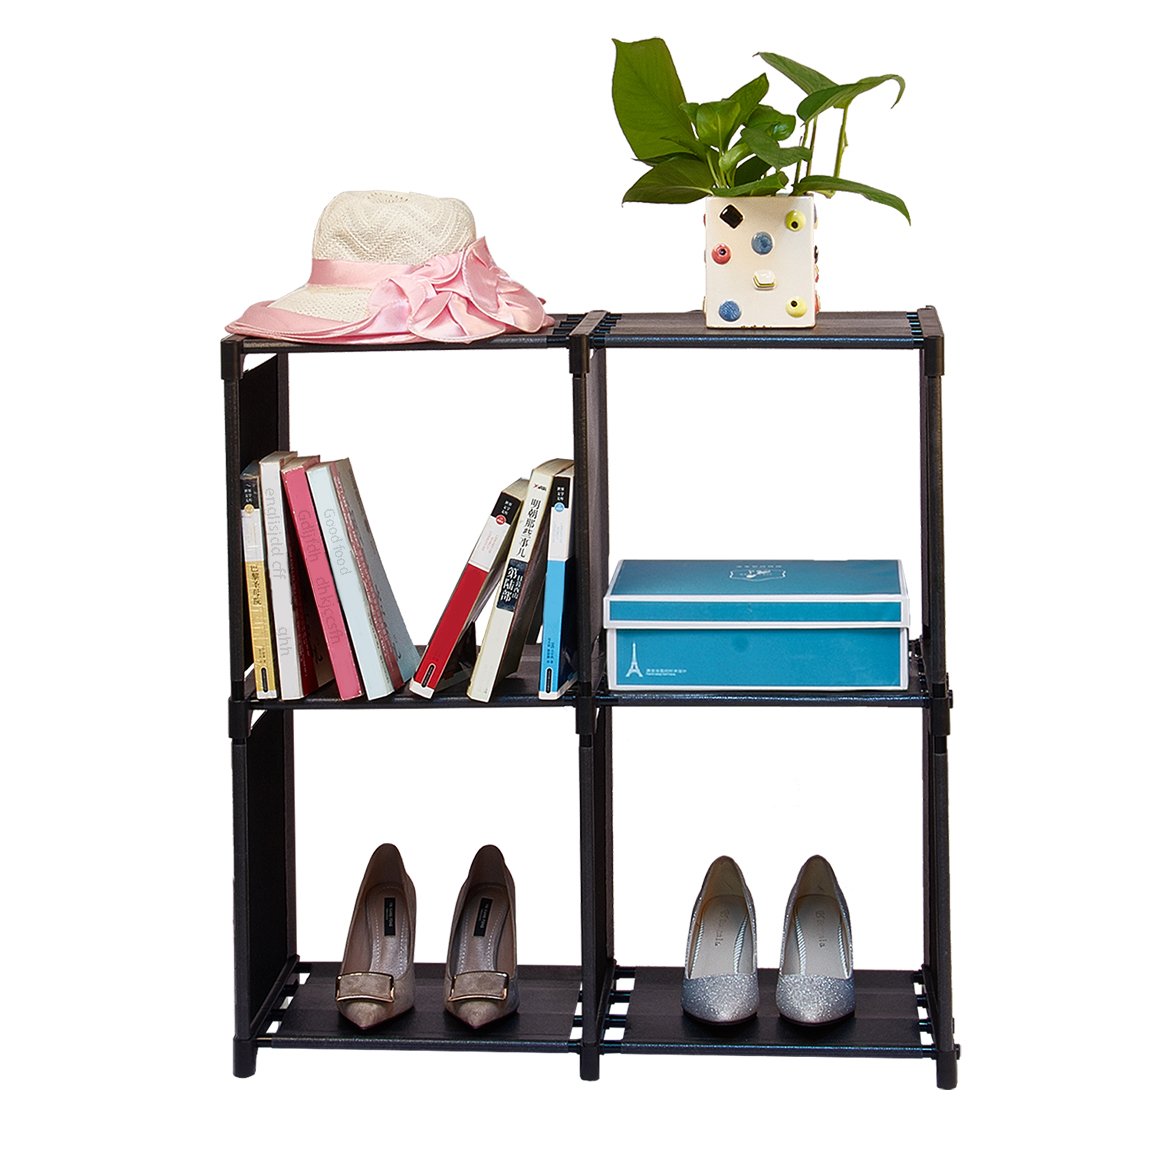 Wishwill 4 Cube Organizer Storage Shelves Book Shelf Cabinet 3-tier Closet Bookcase for Toy/Shoe/Clothes Black